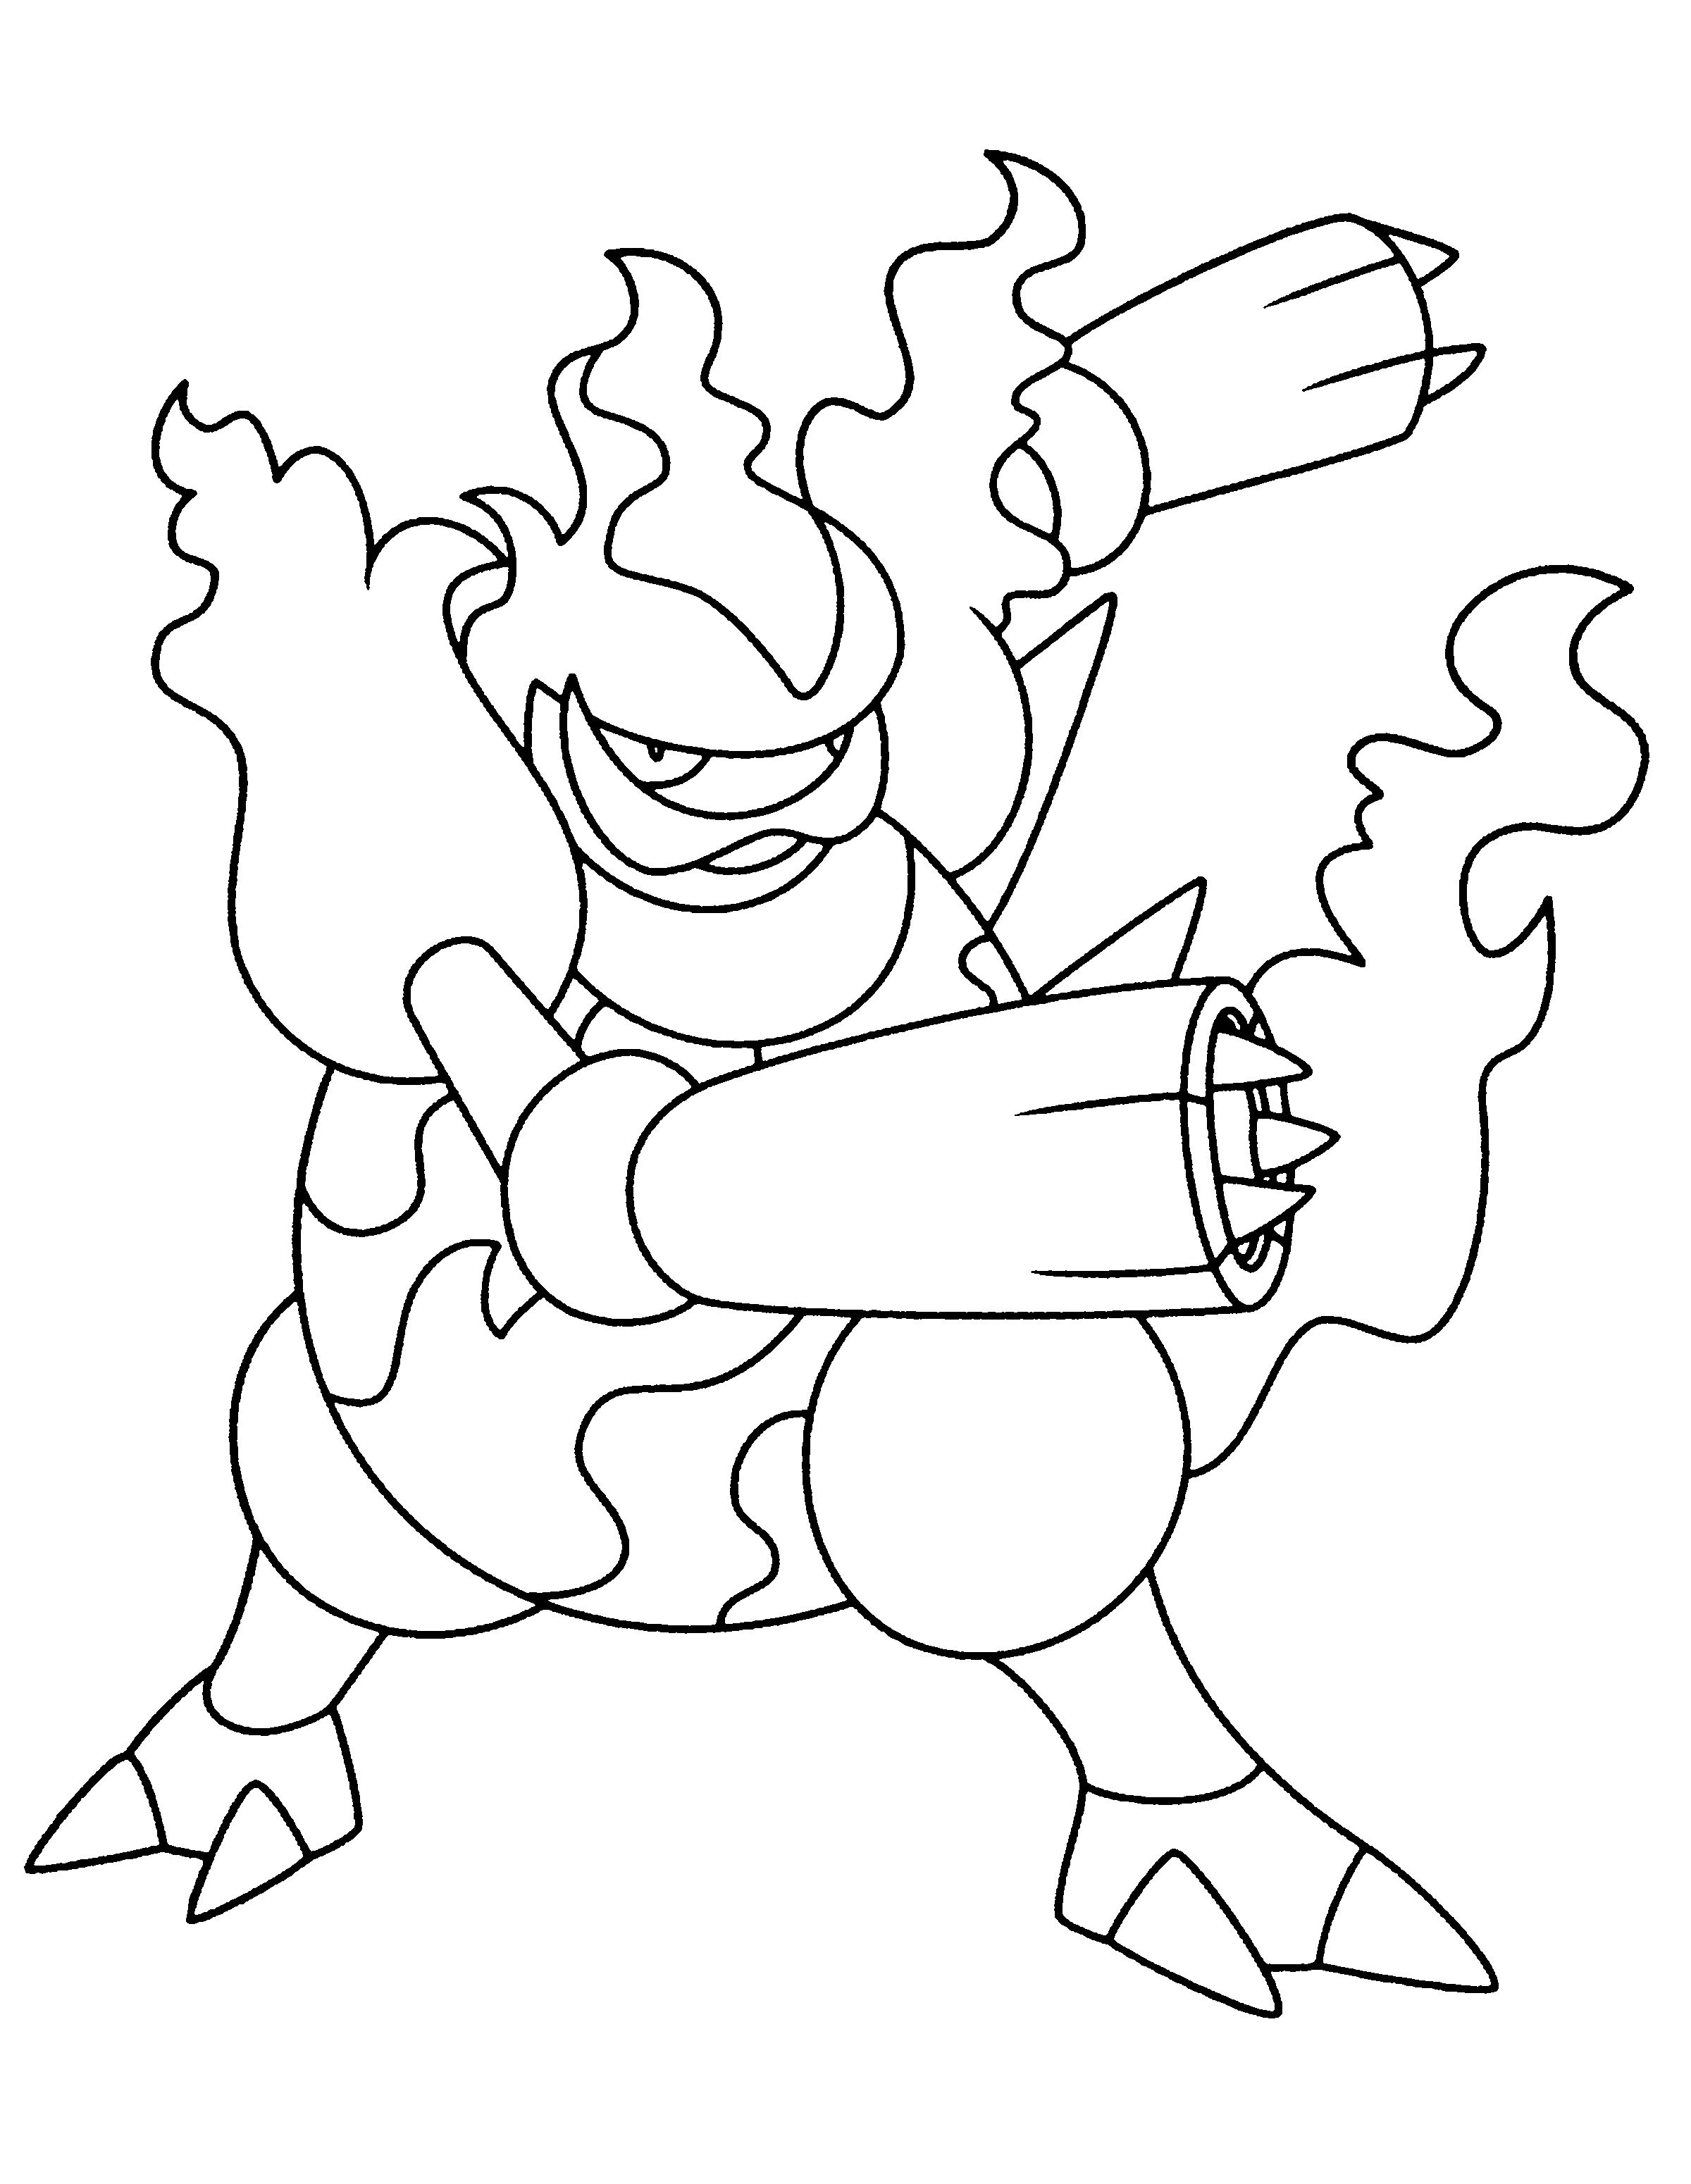 animated-coloring-pages-pokemon-image-0612